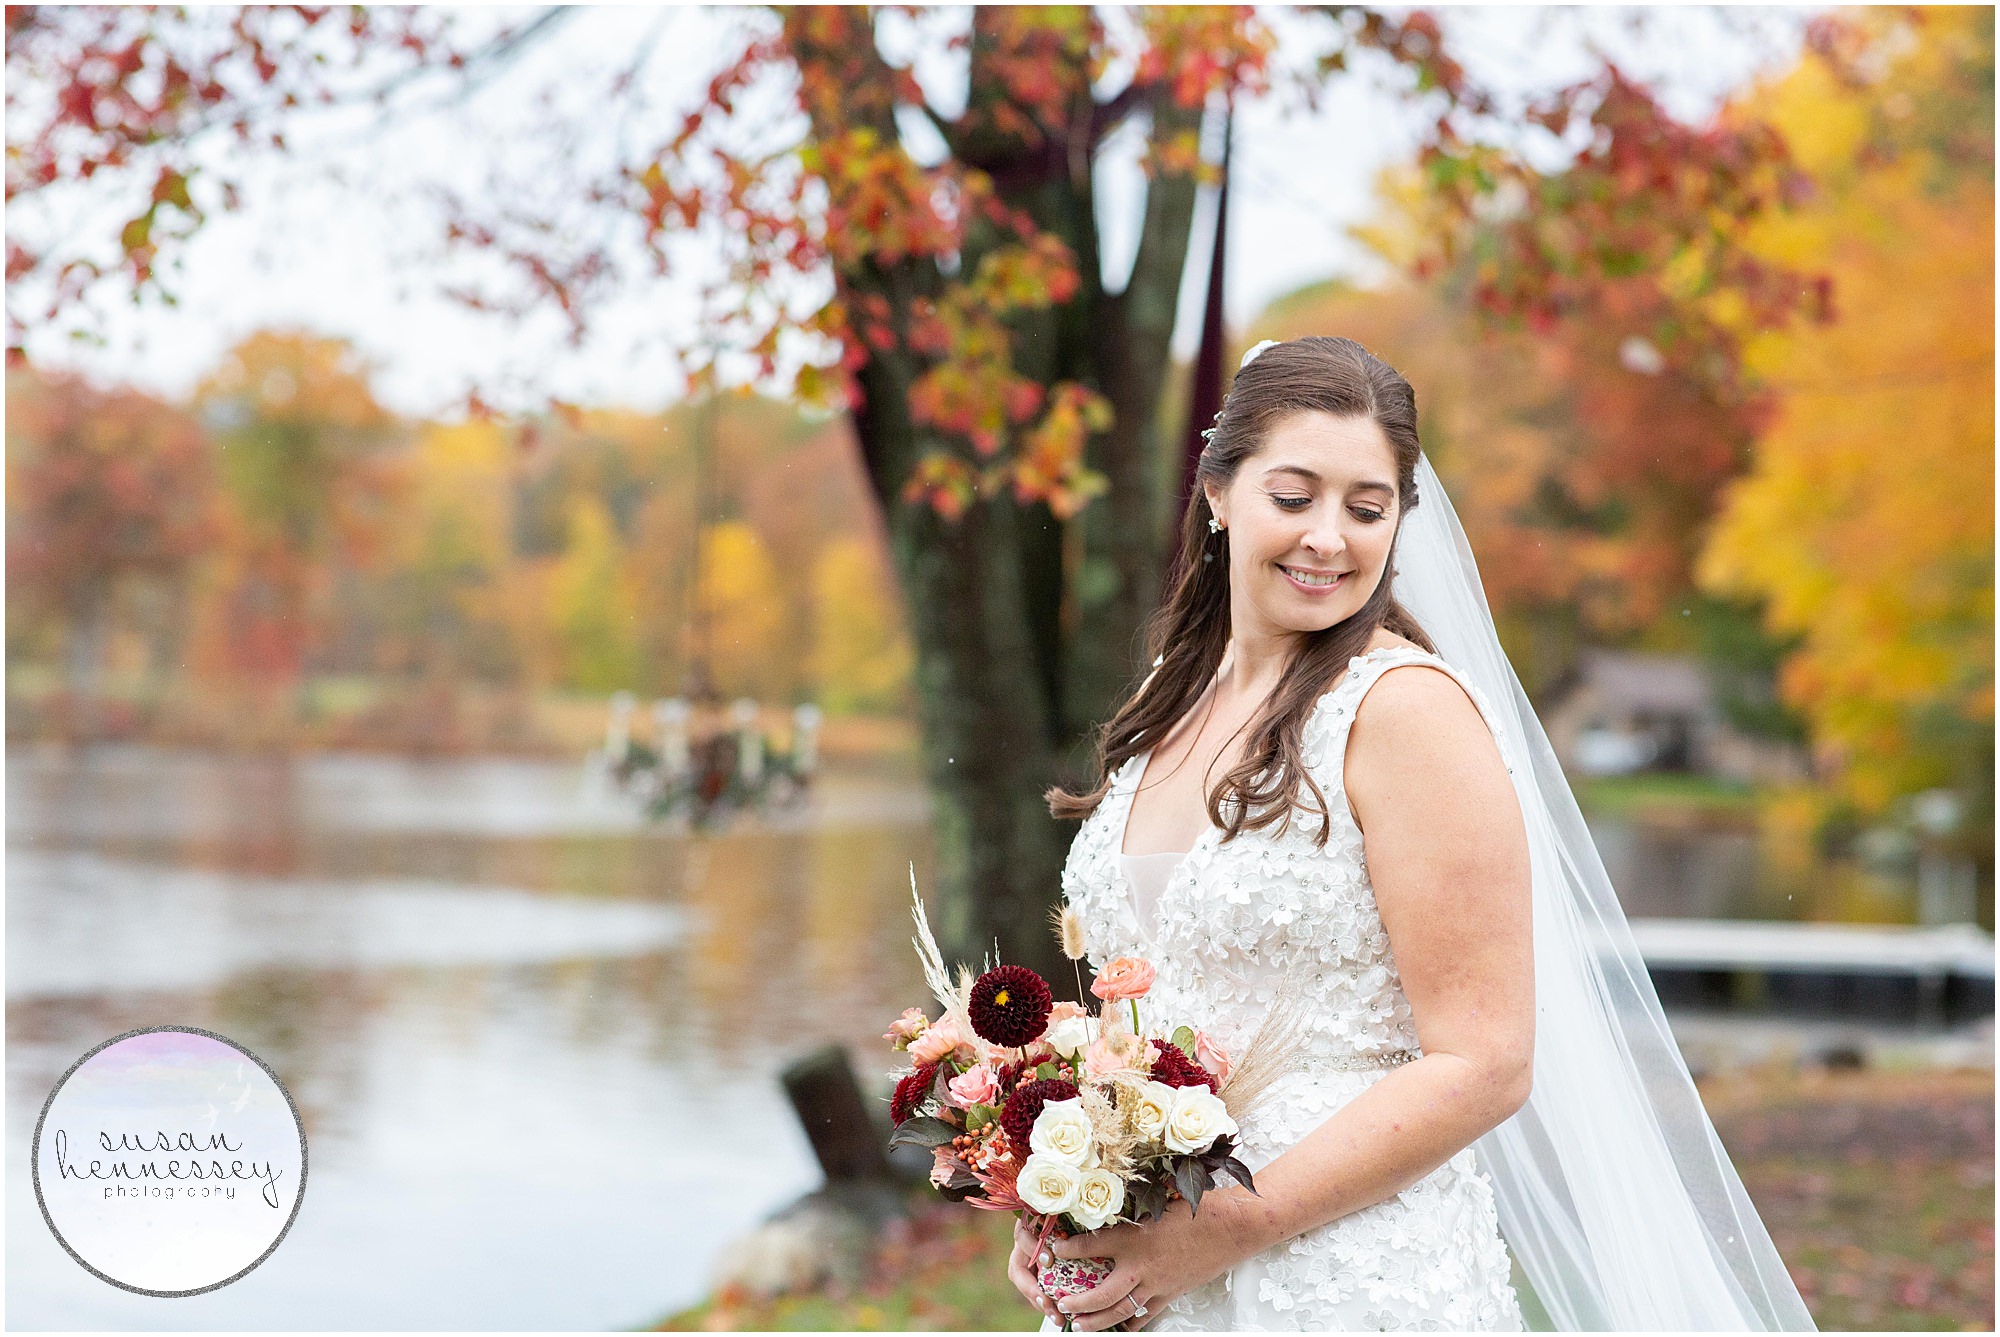 Bridal portraits at Andre's Lakeside Dining Microwedding